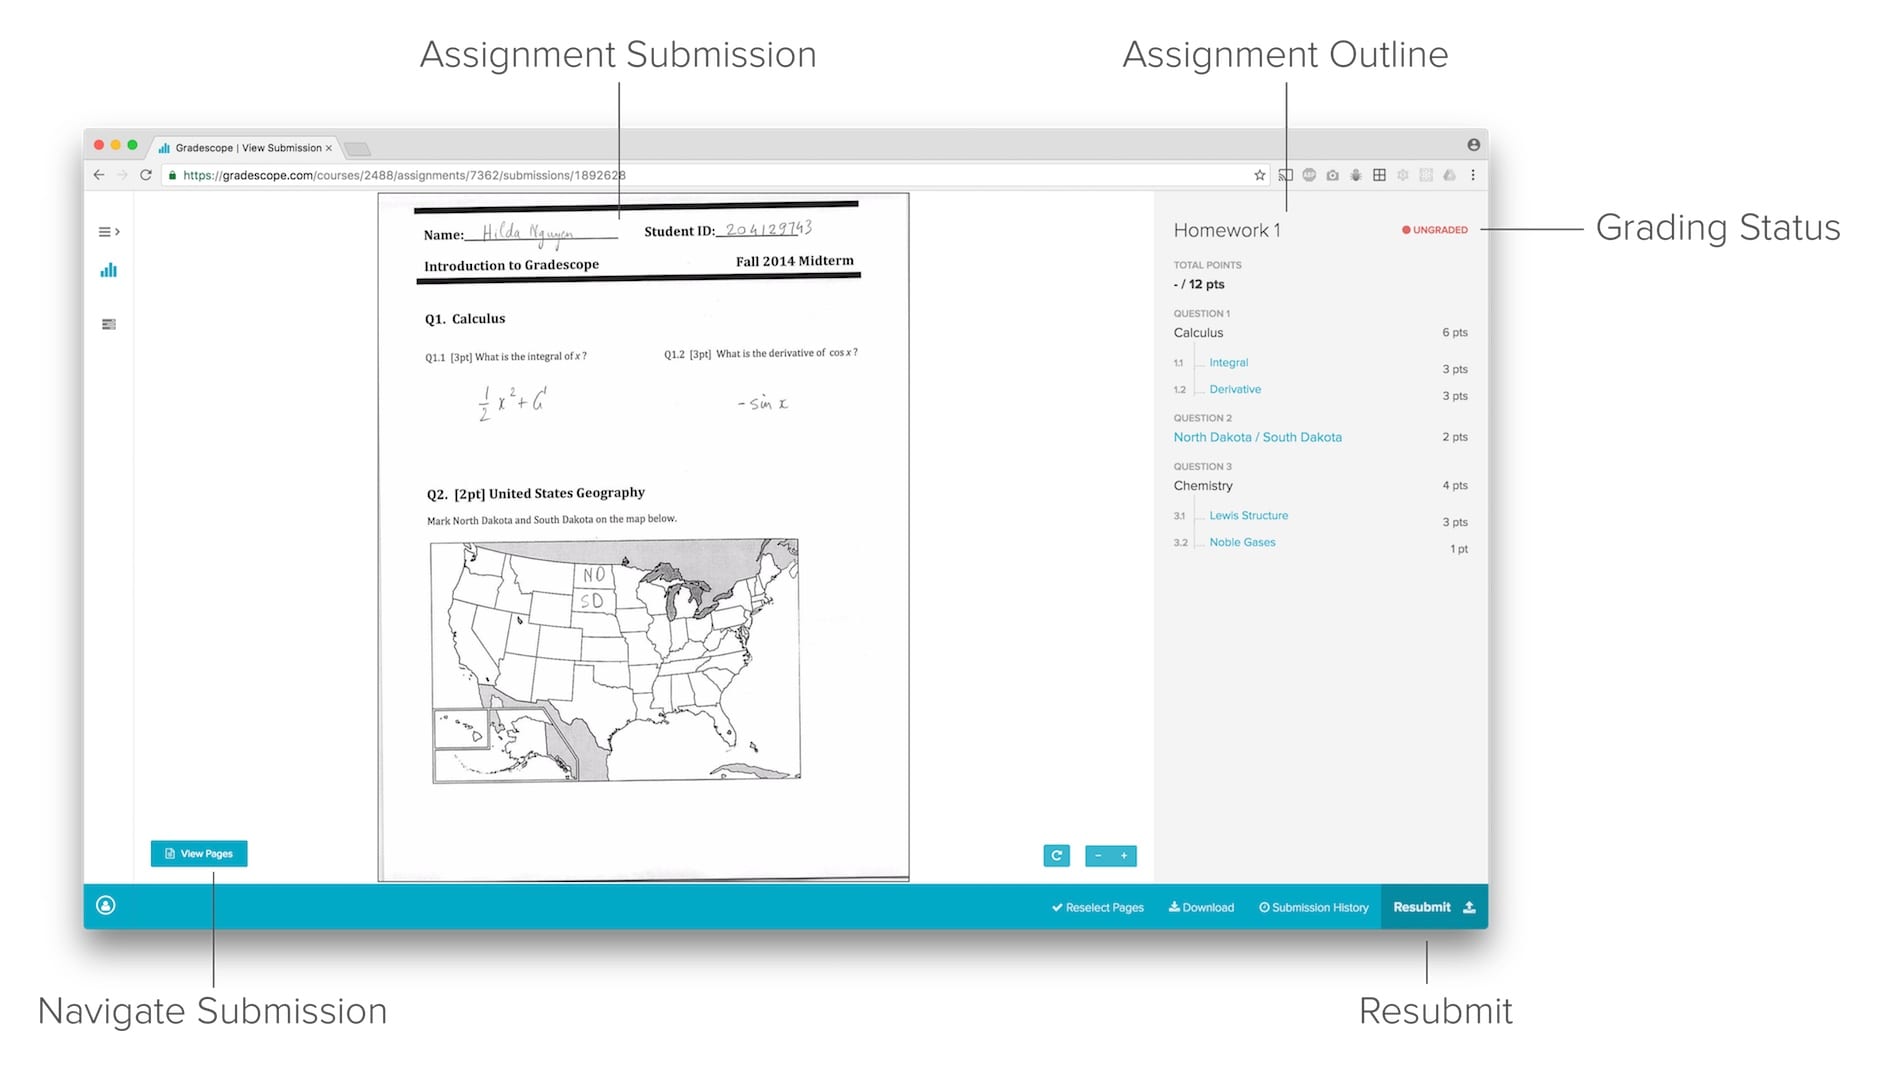 Interface for viewing your submission and the assignment outline before grading